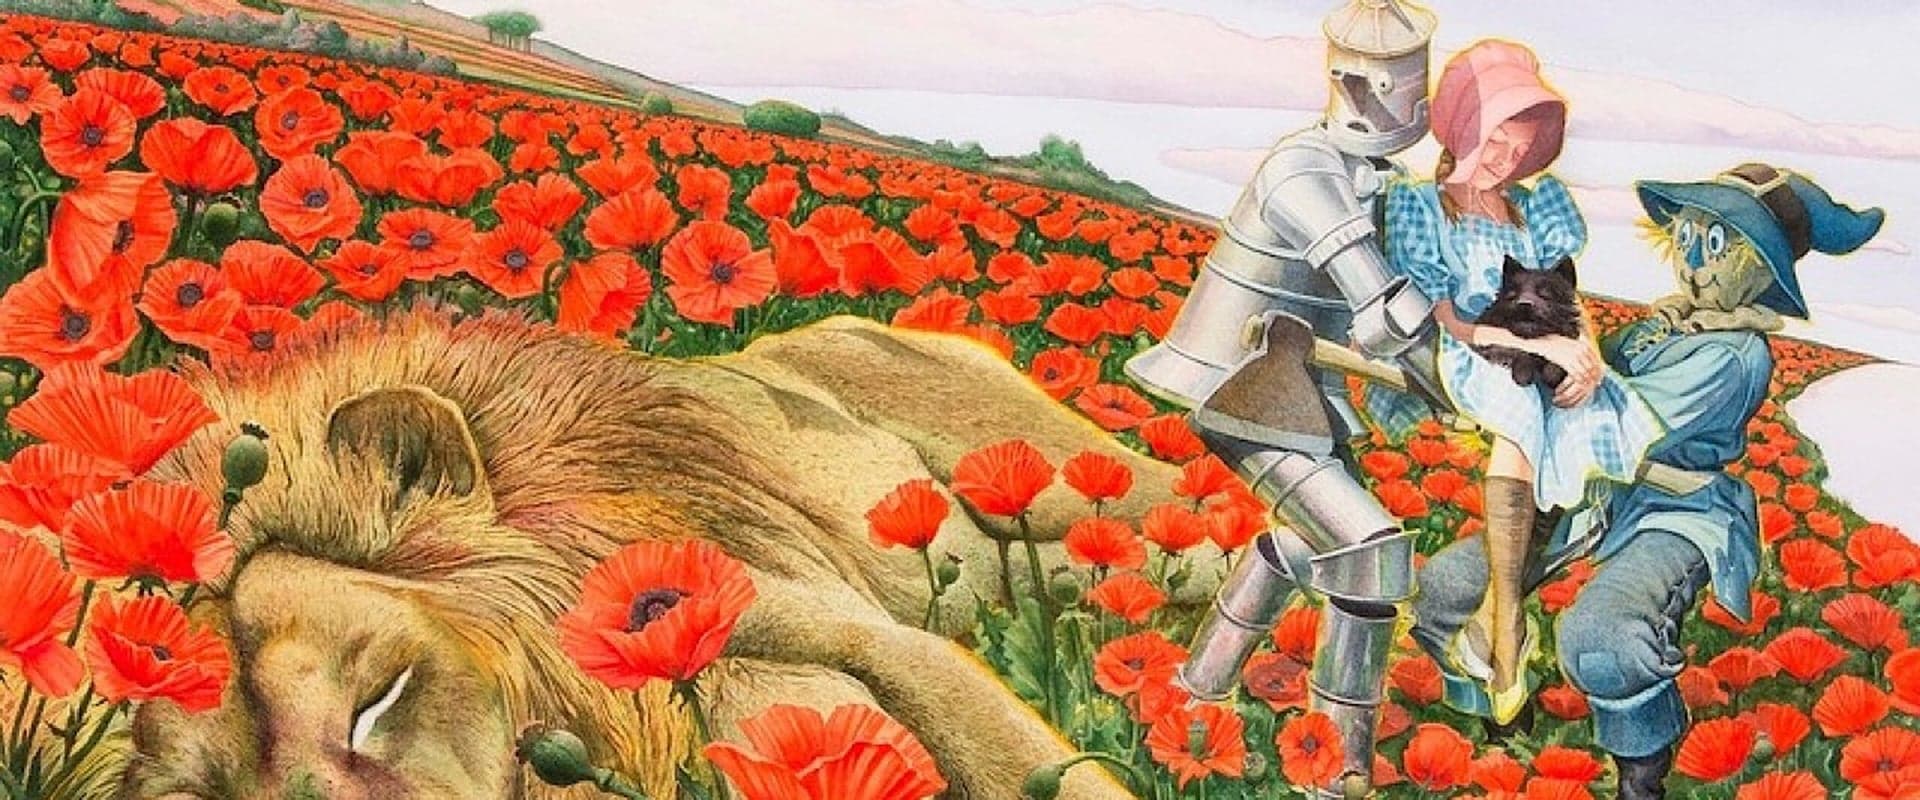 Charles Santore Illustrates The Wizard of Oz